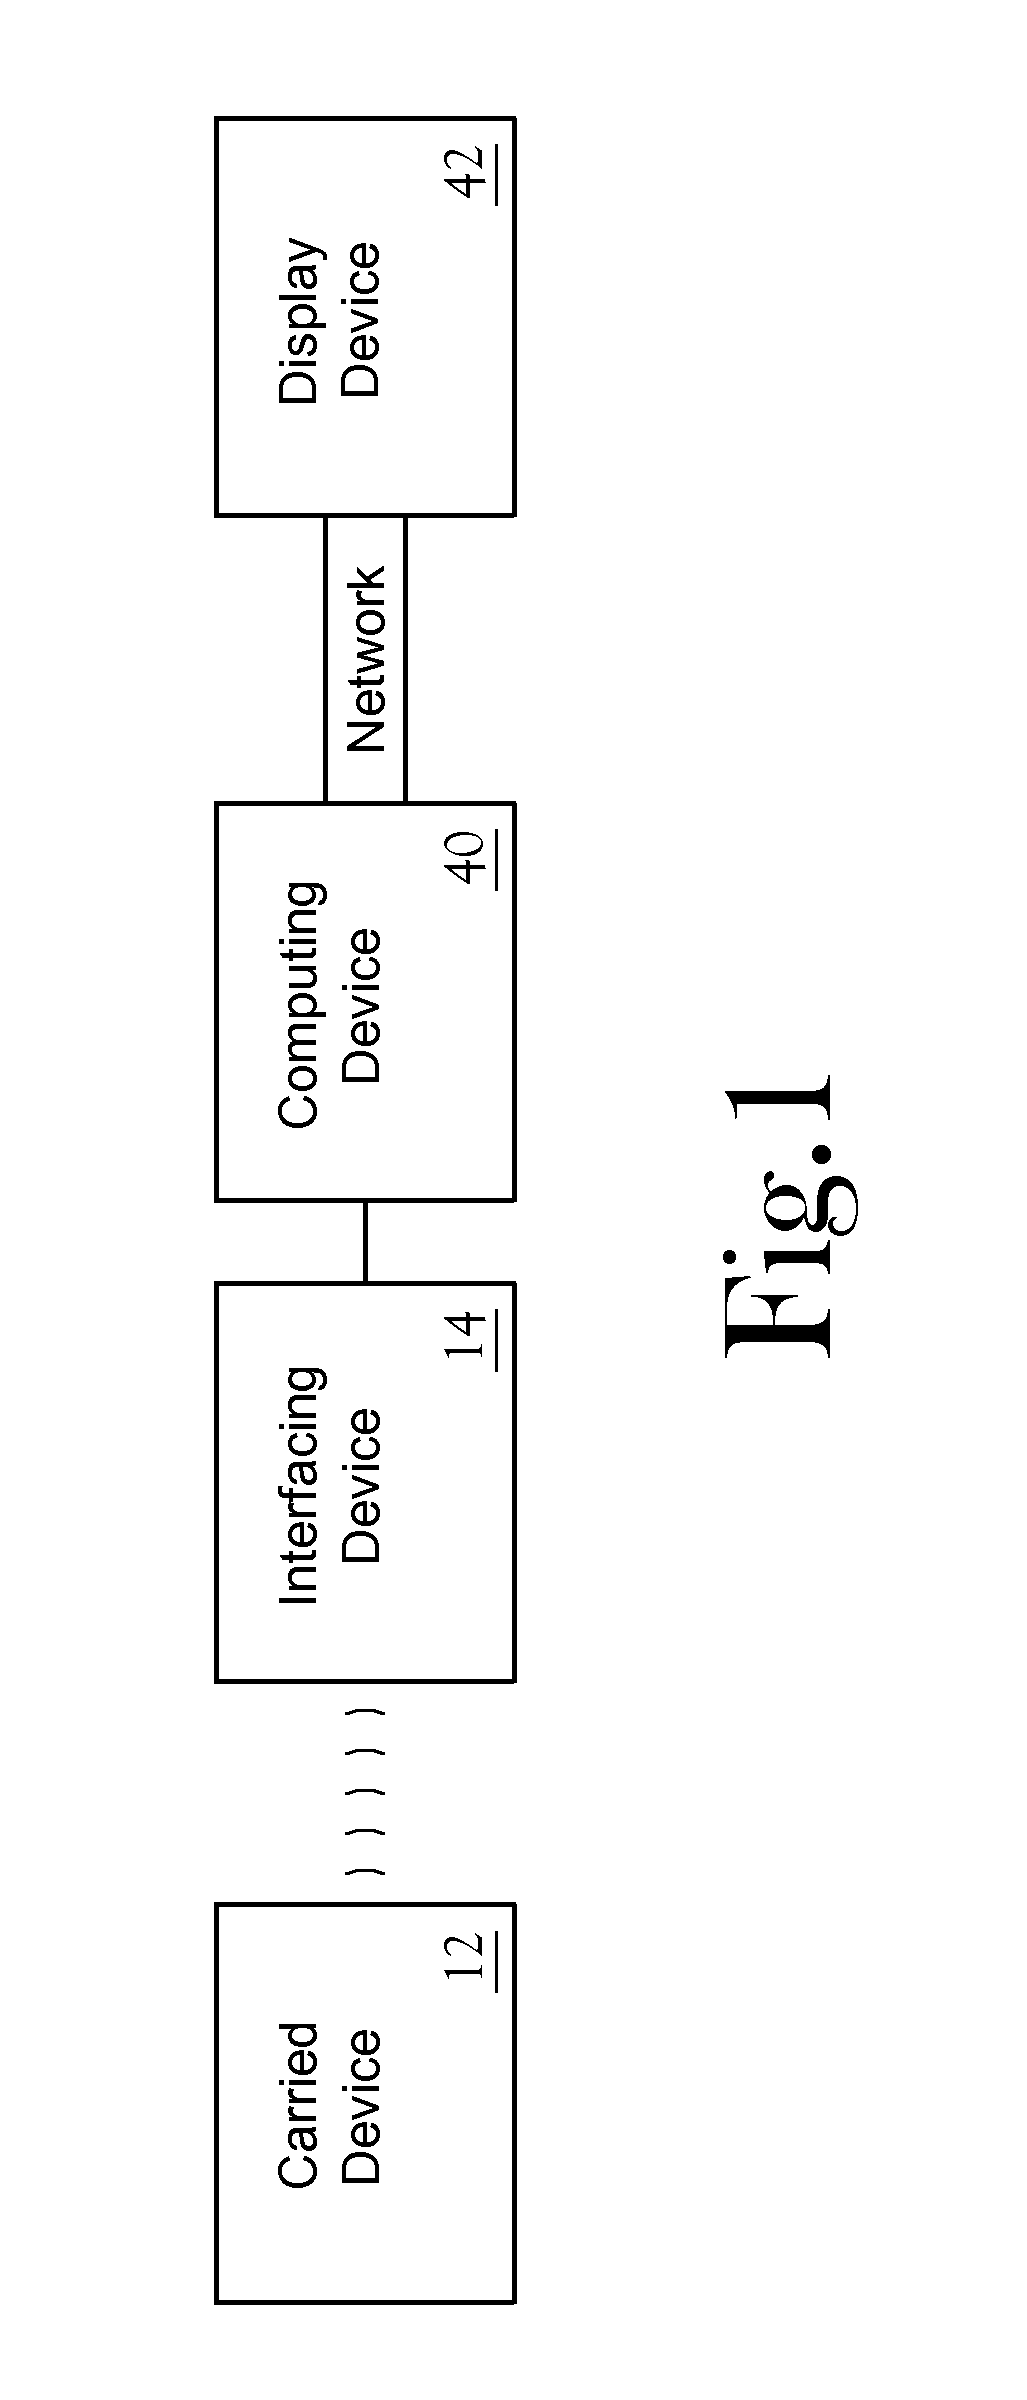 System for detecting information regarding an animal and communicating the information to a remote location